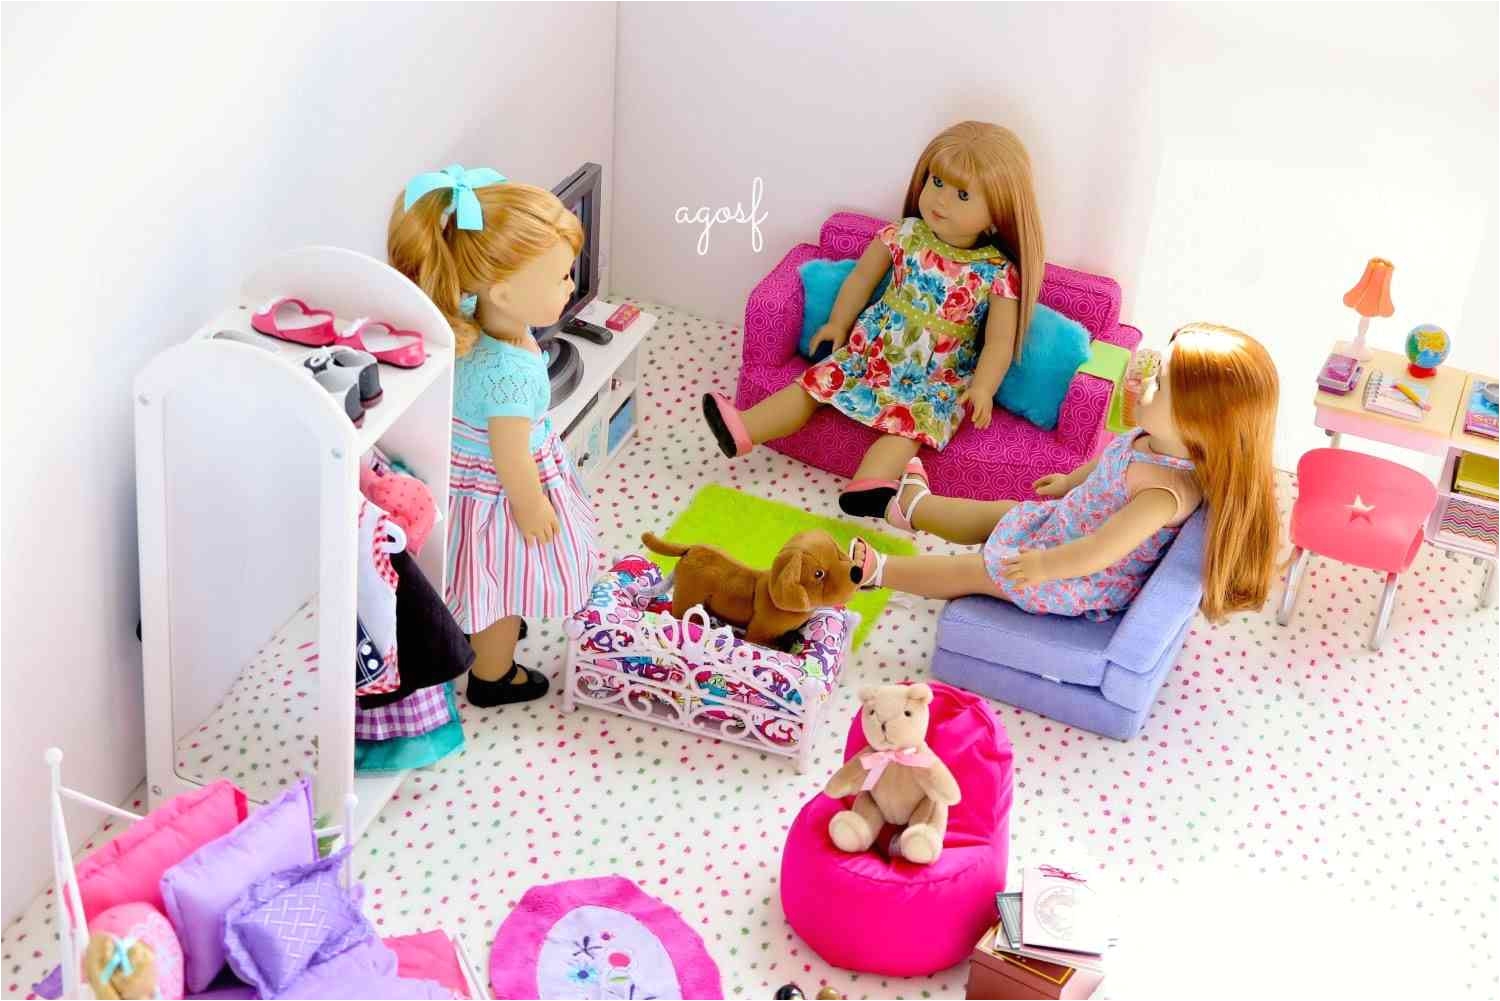 18 inch doll bedroom set lovely upholstery beds best s media cache ak0 pinimg originals 06